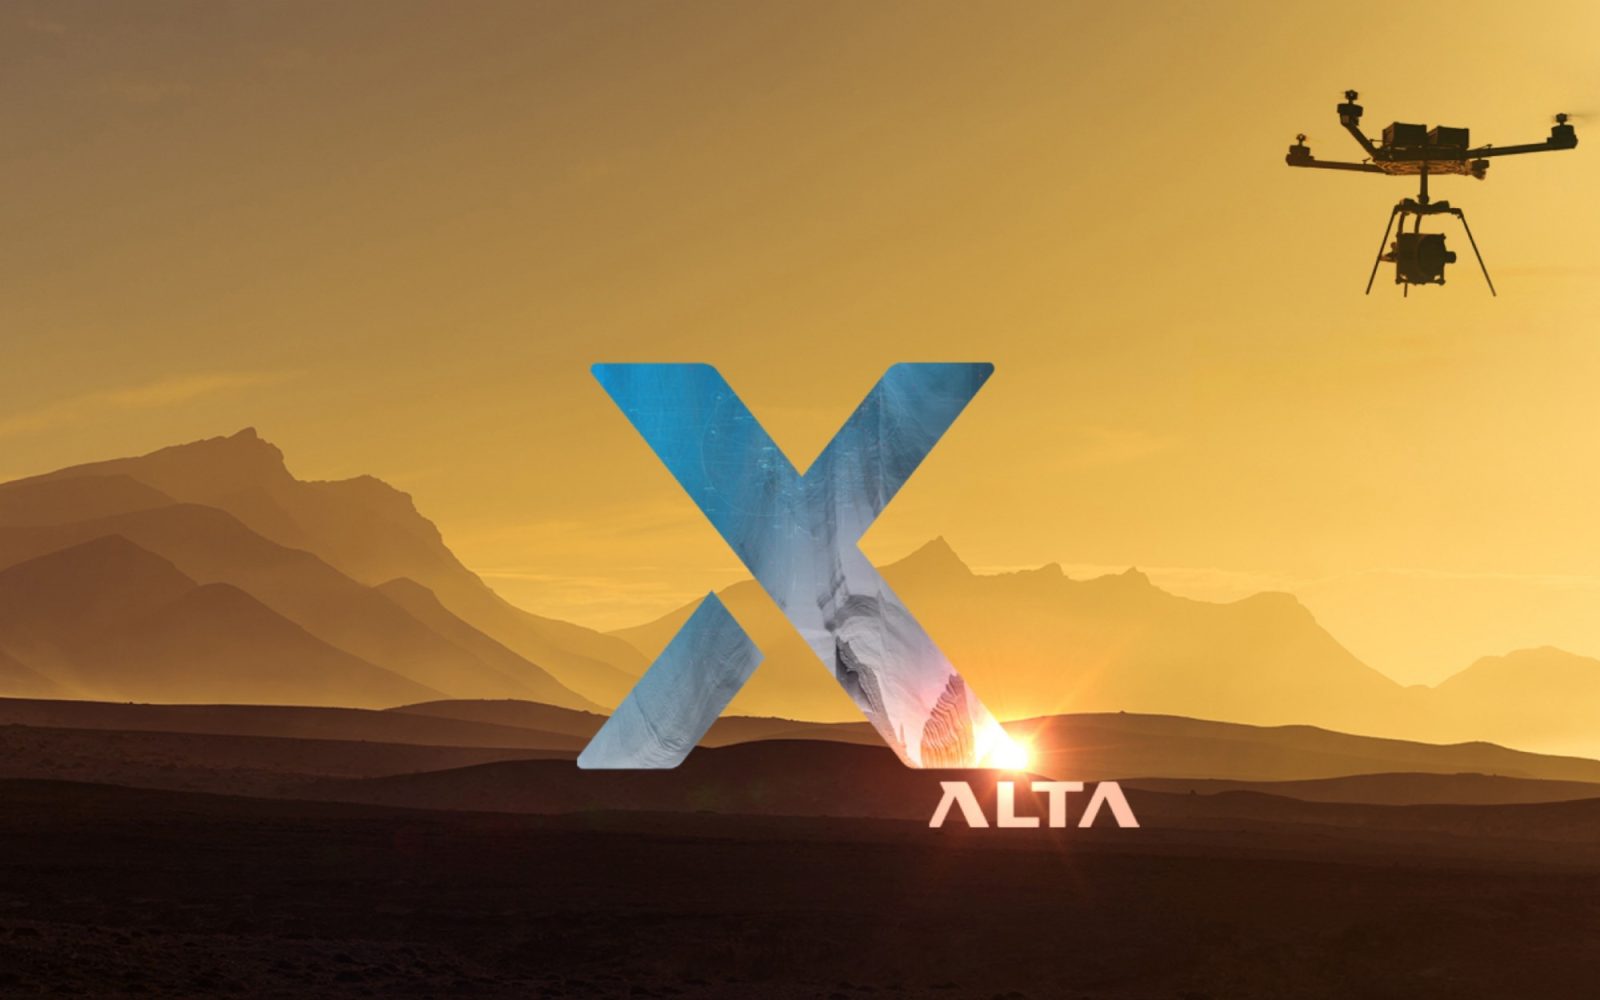 FreeFly introduces the Alta X - a foldable quadcopter with ActiveBlade